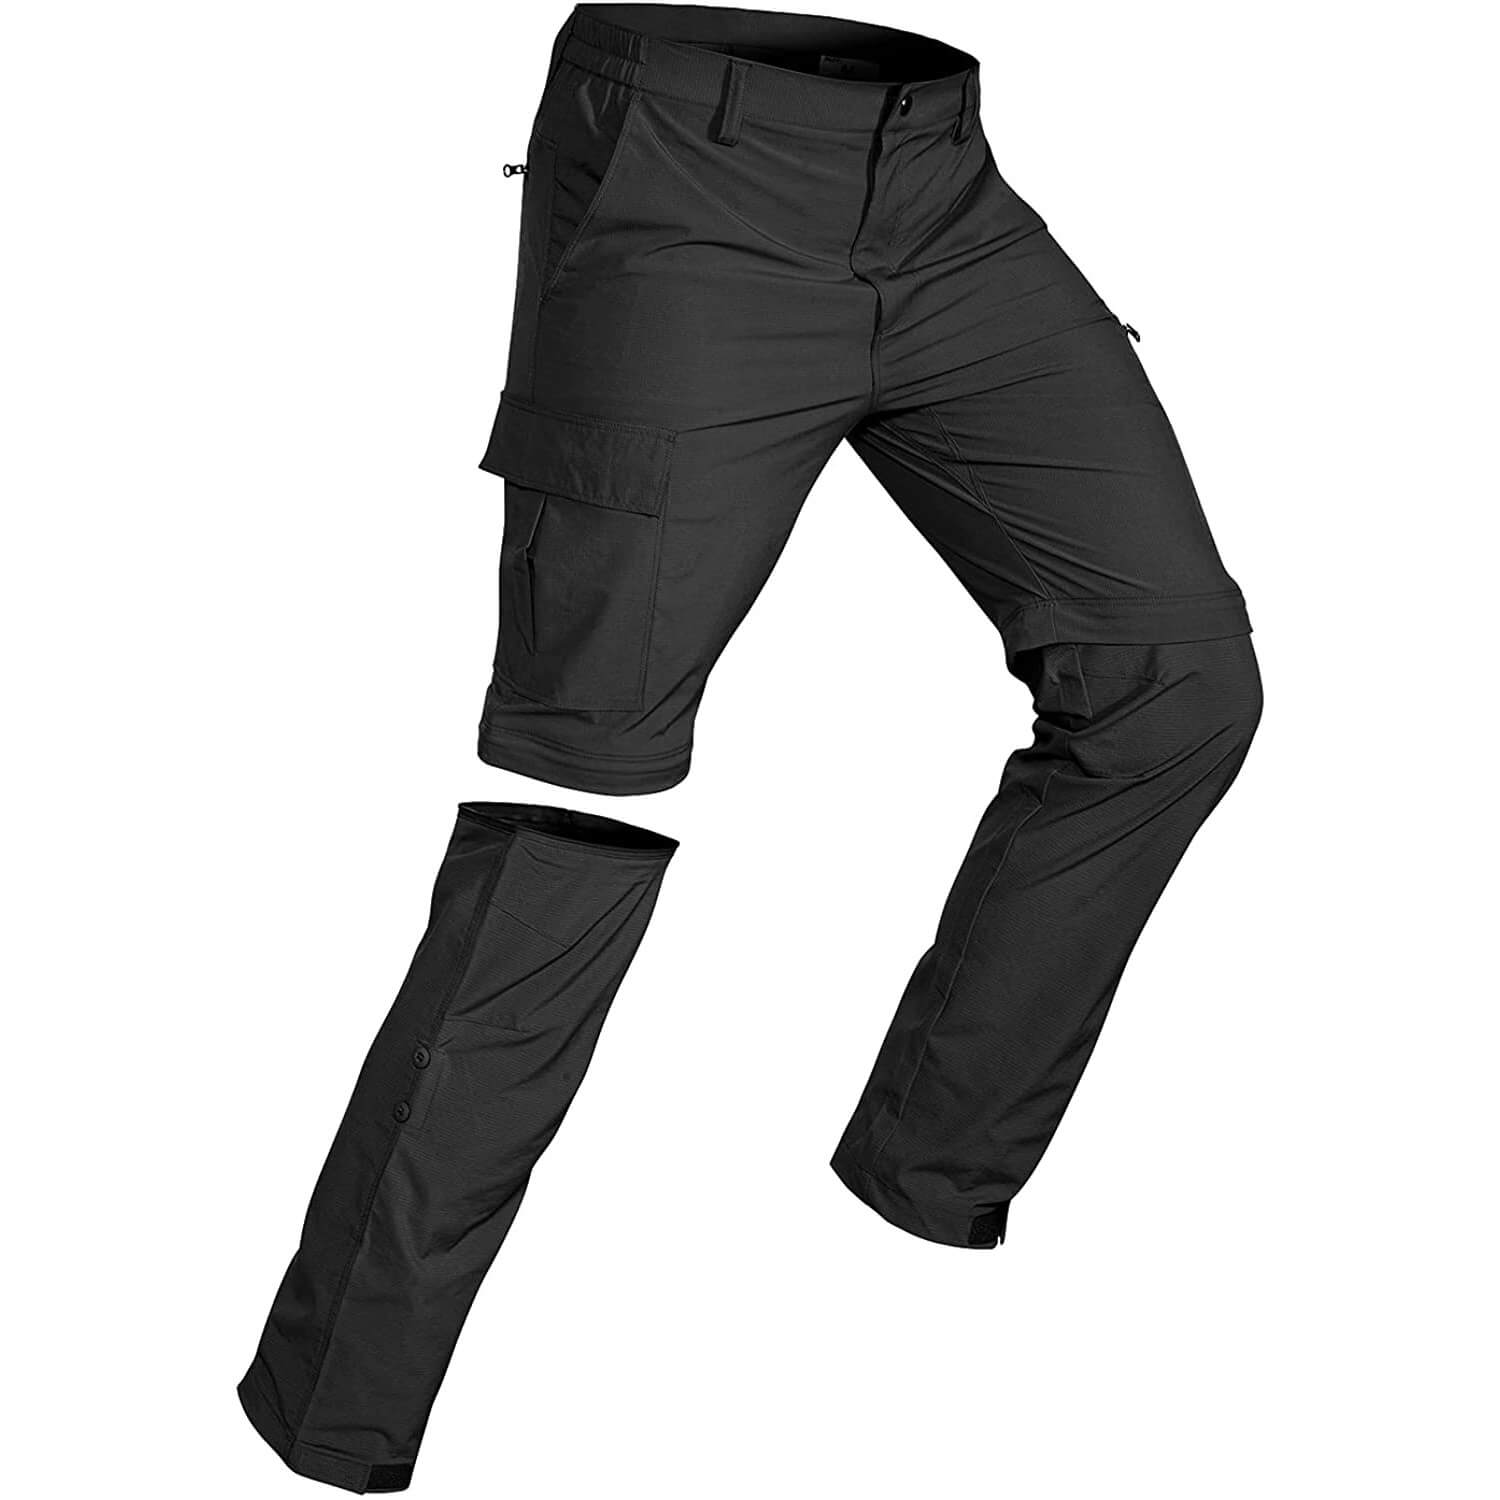 Cargo Trousers and Pants for Hiking and Travelling I Green – Tripole Gears